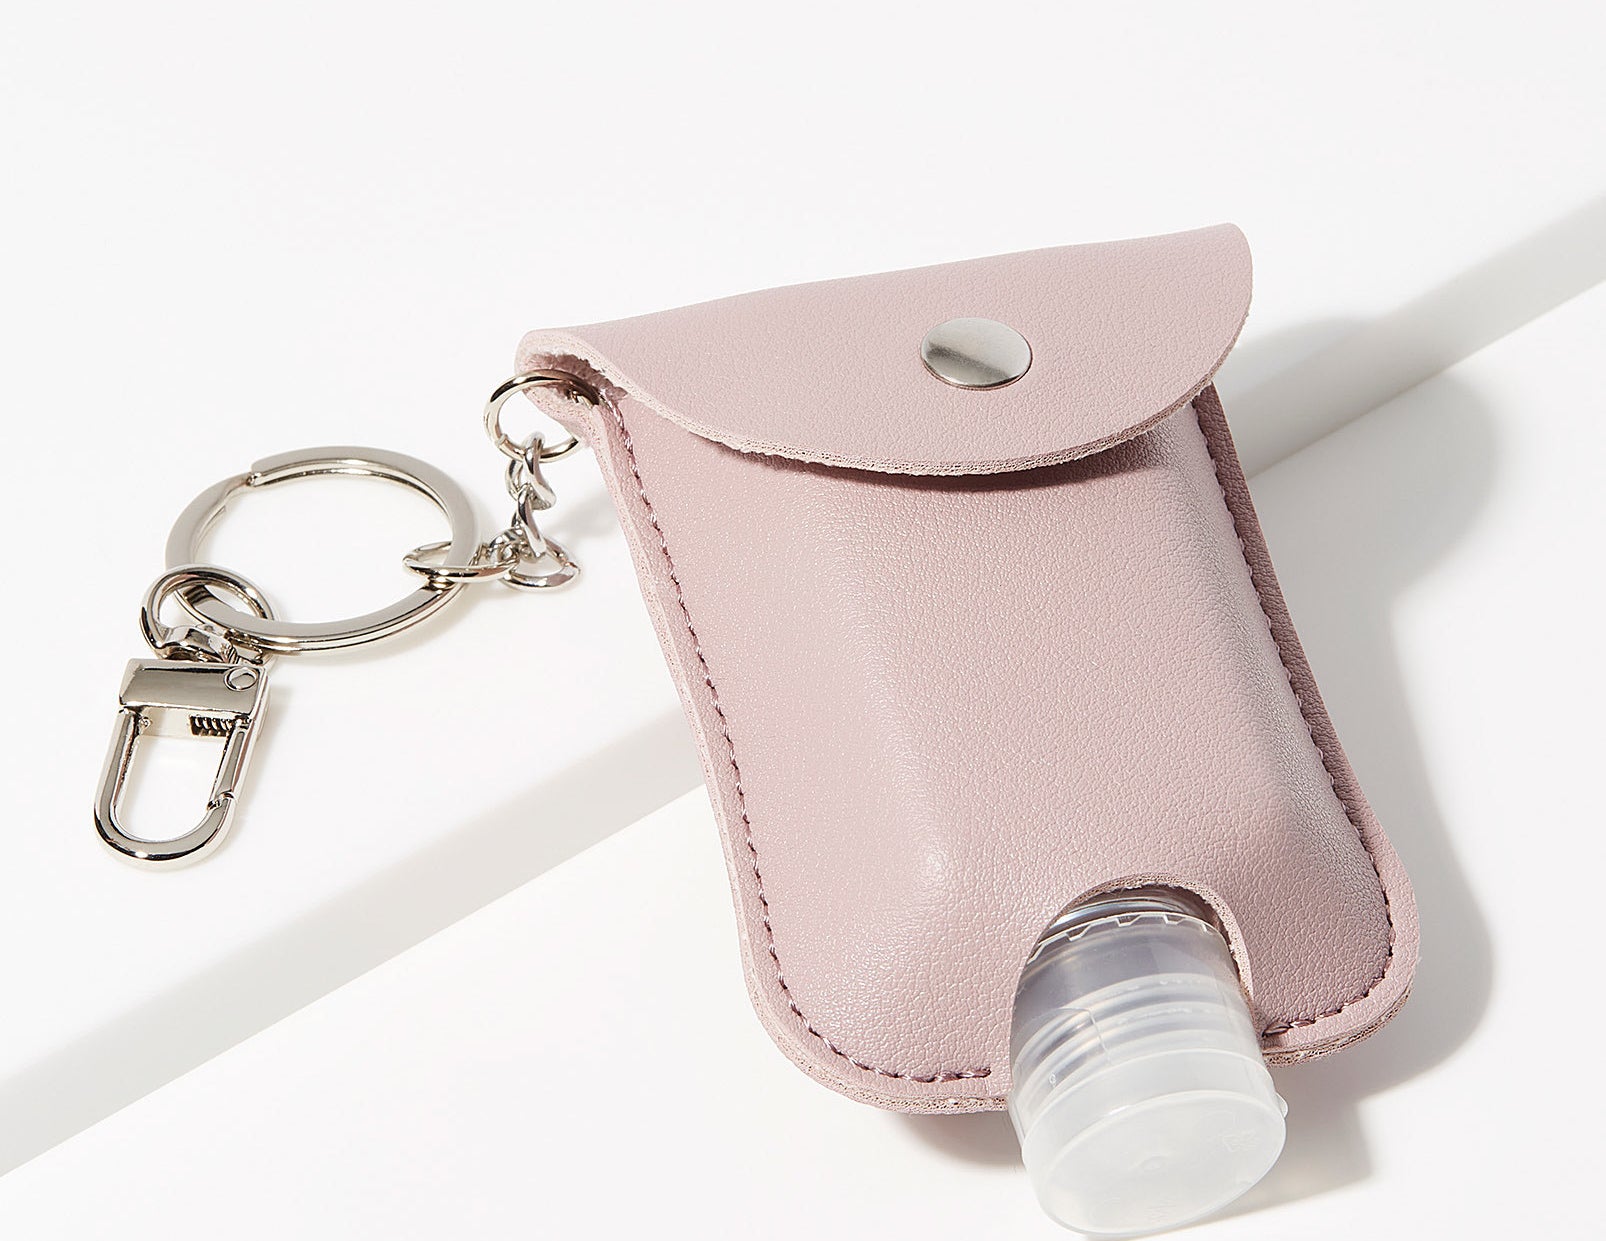 A small pouch with a hand sanitizer bottle in it